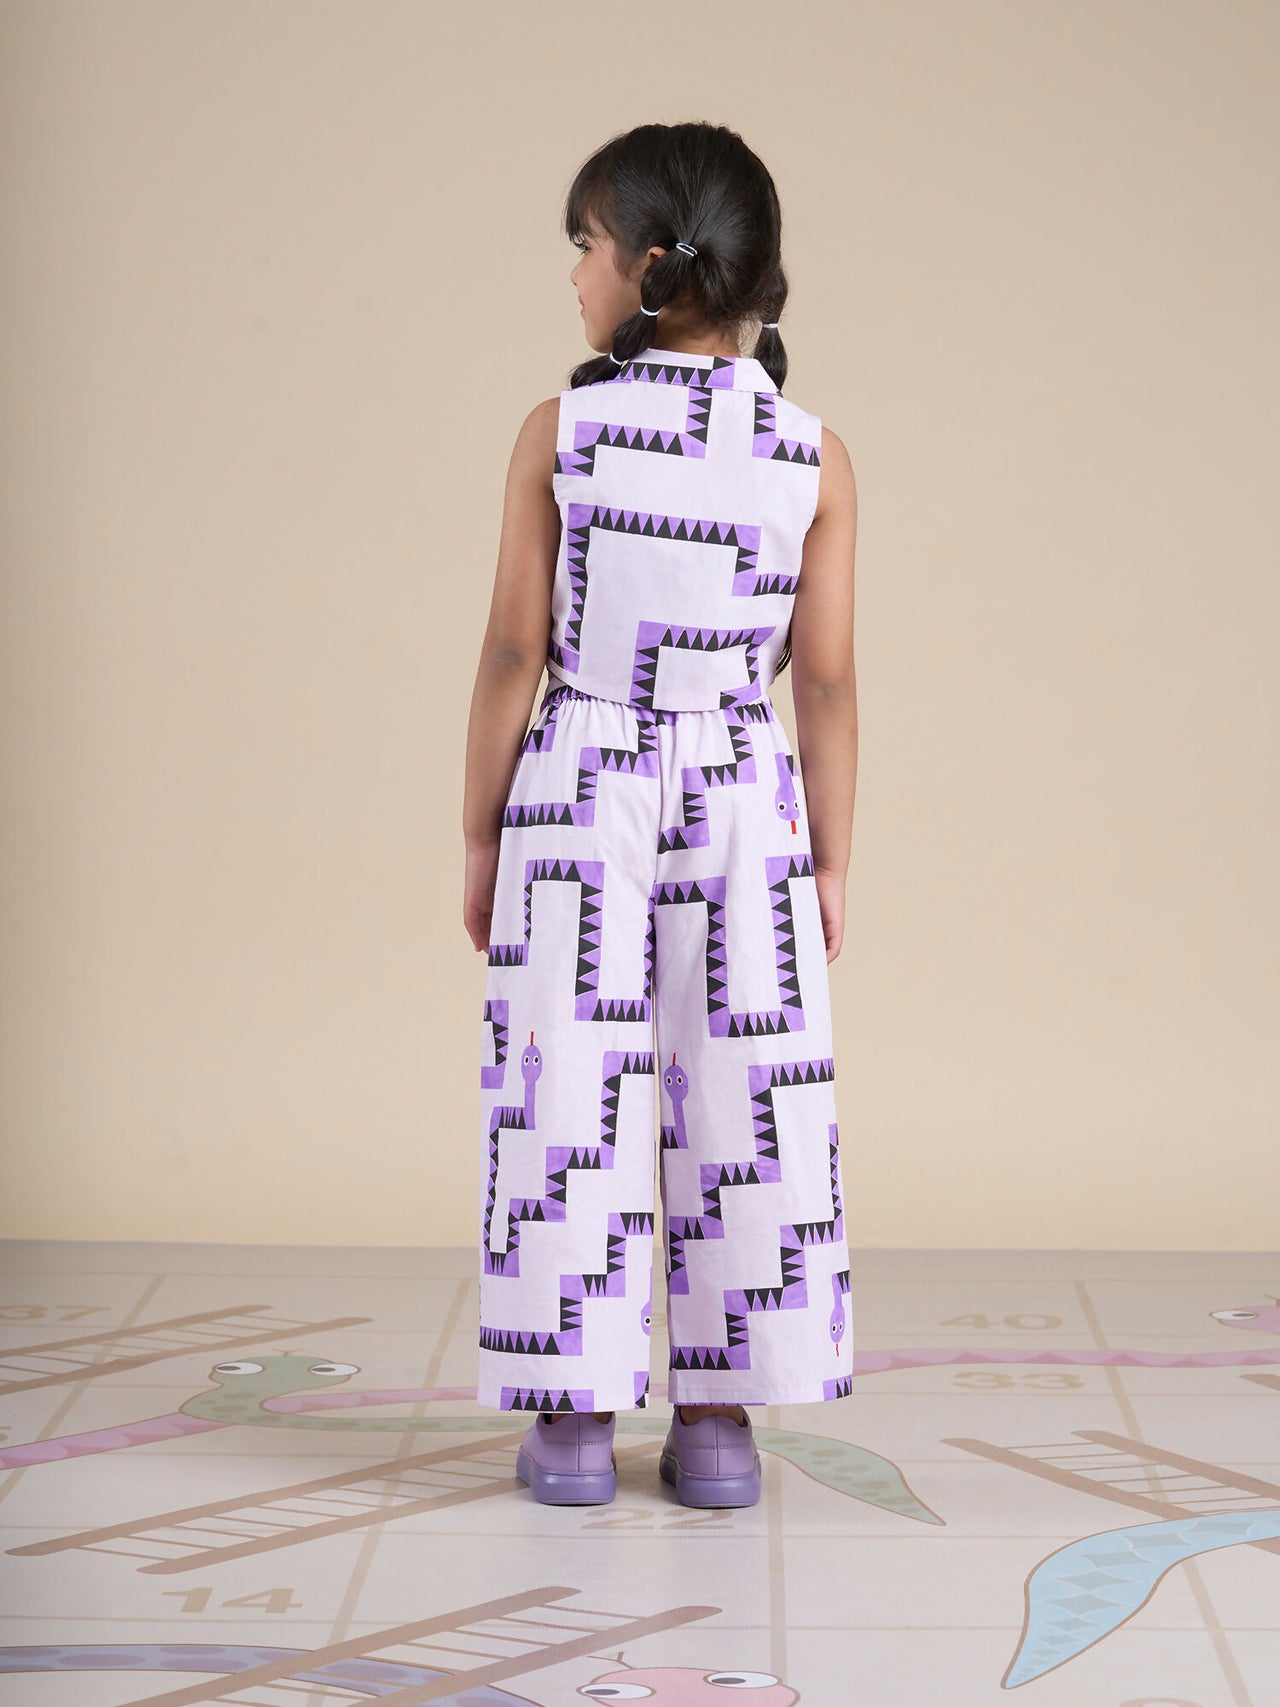 Snakes and Ladders Girls Purple Table Print Top and Pant Set from Siblings Collection - Distacart